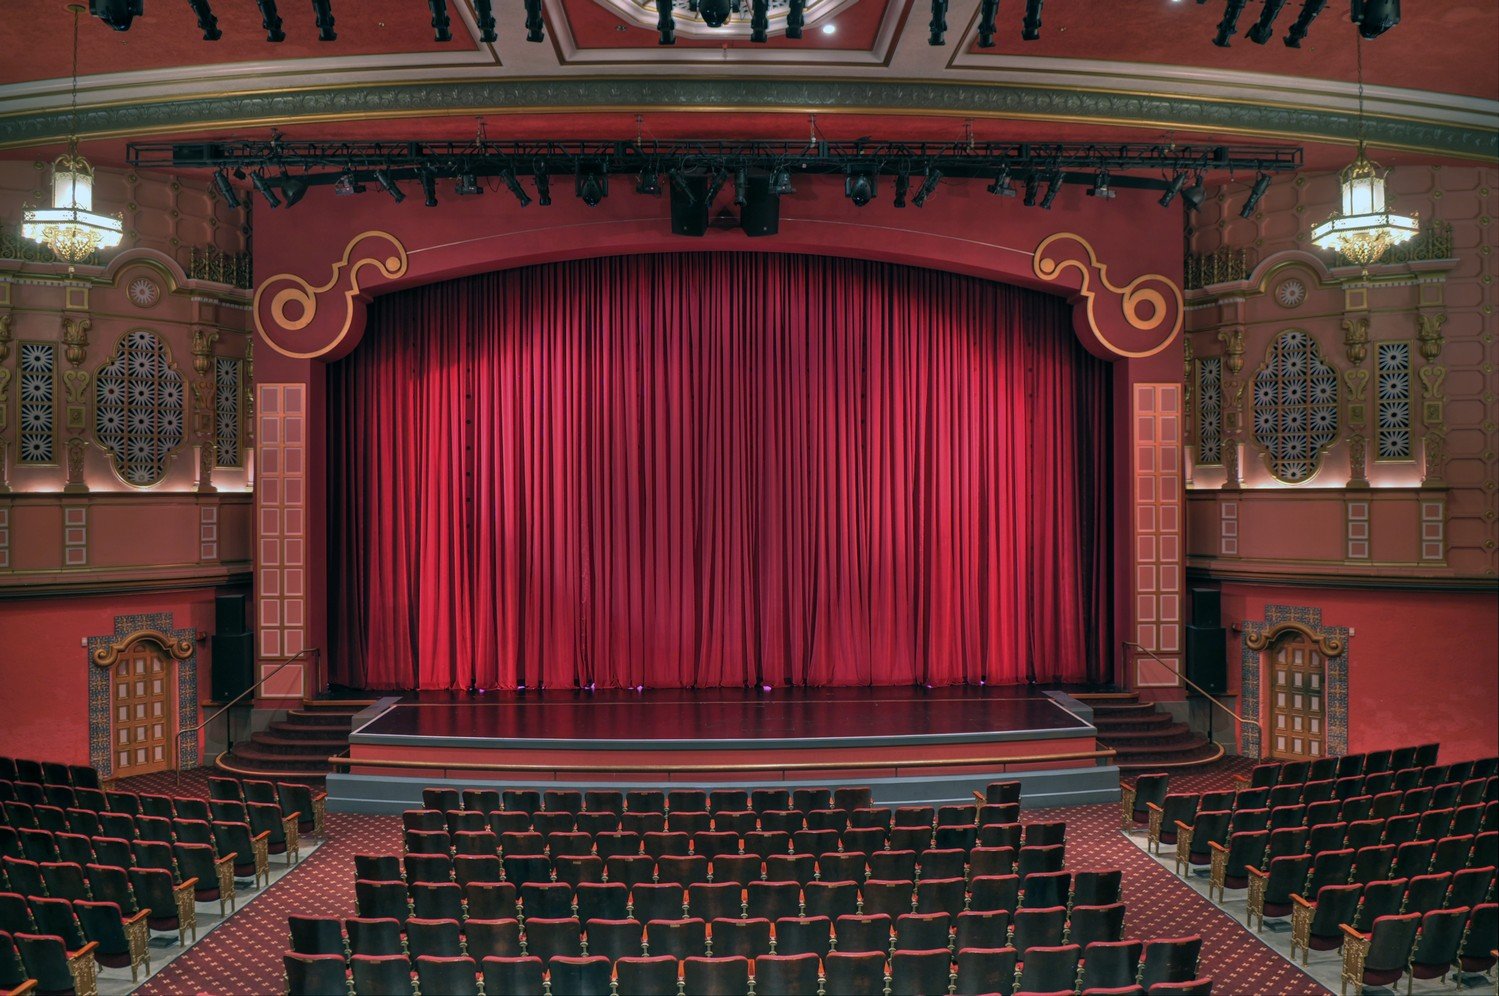 Places to go if you are a theatre lover